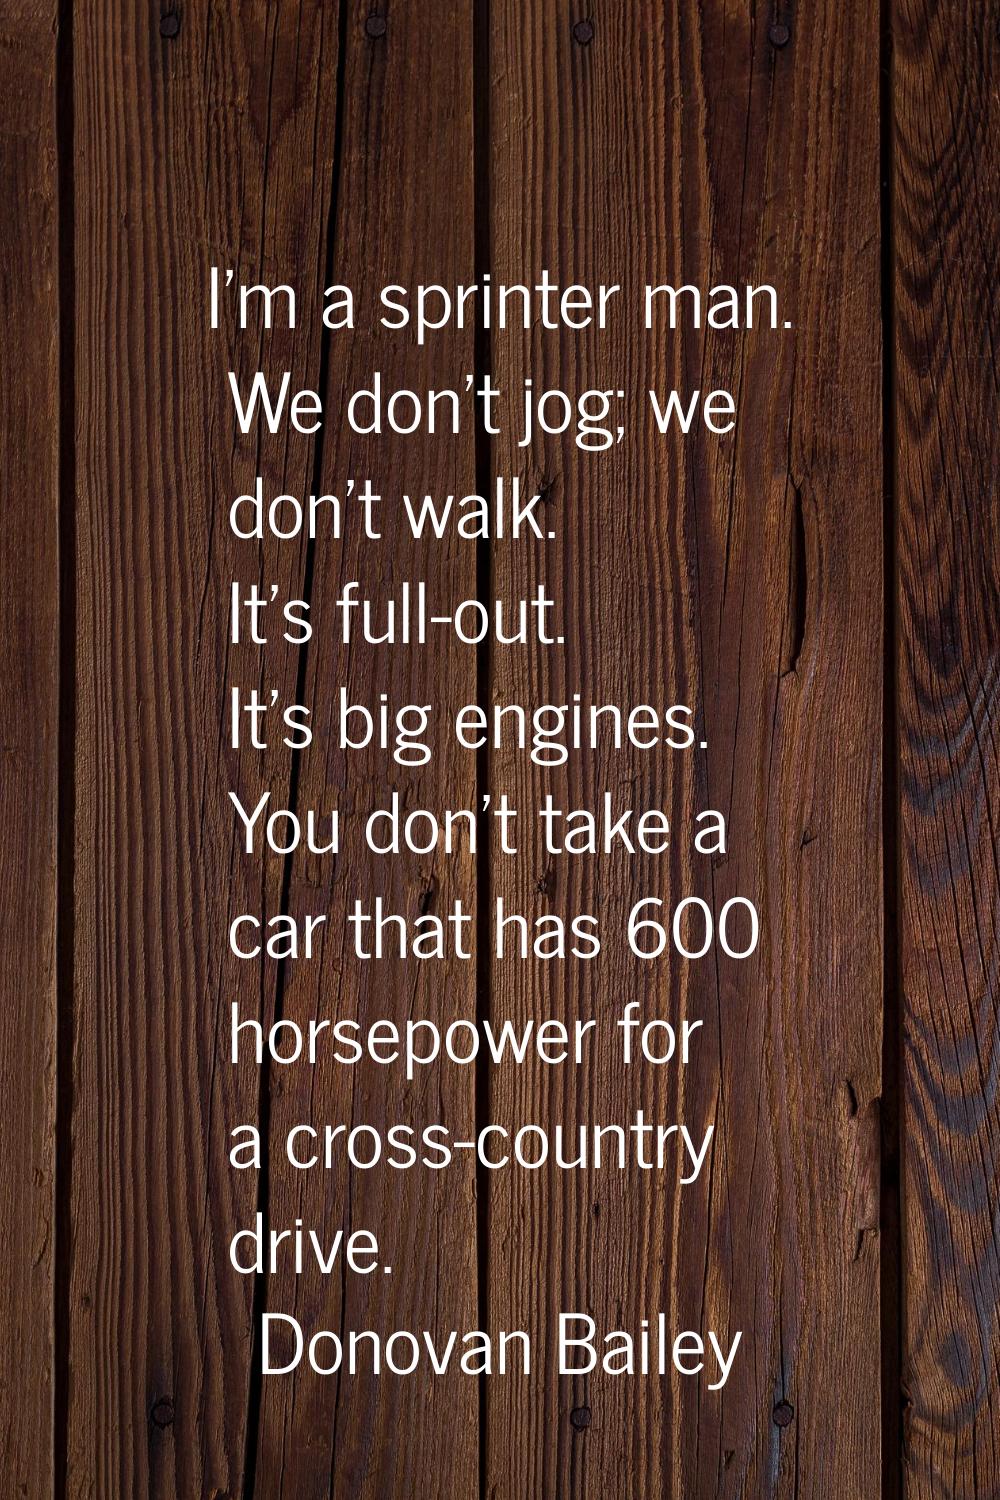 I'm a sprinter man. We don't jog; we don't walk. It's full-out. It's big engines. You don't take a 